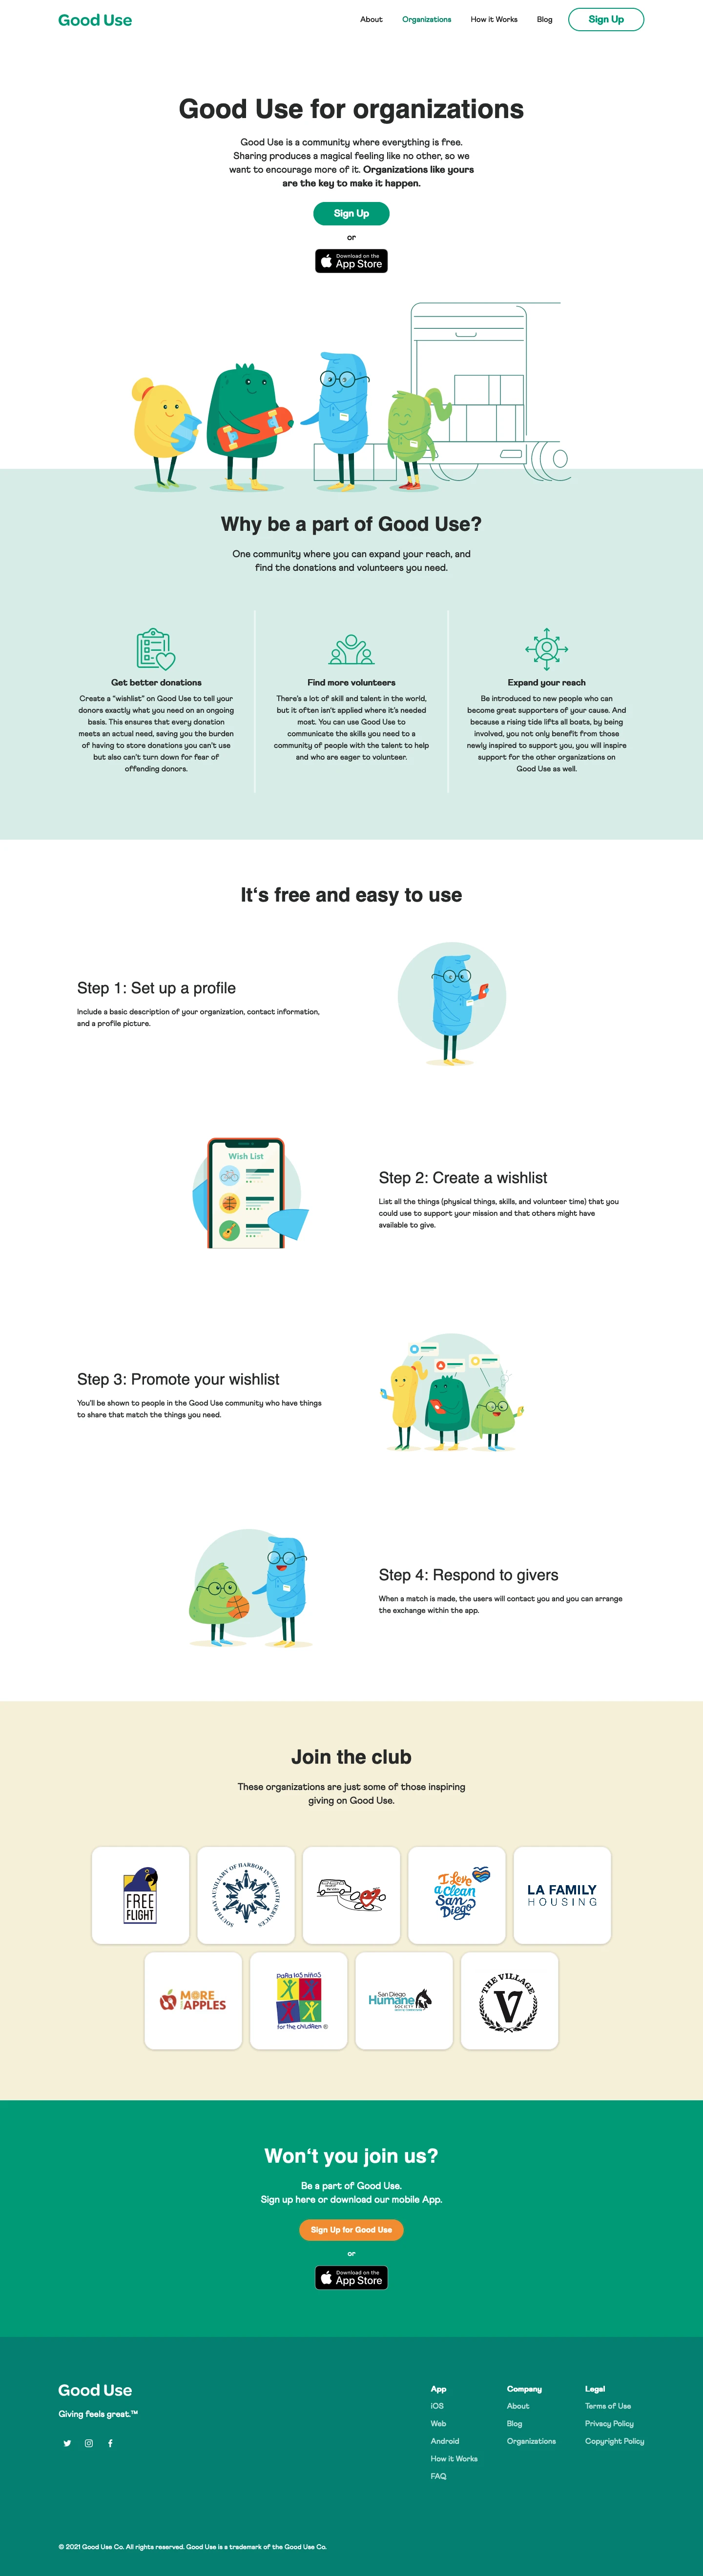 Good Use Landing Page Example: Good Use is a free platform to give and receive goods locally. We all have things to give—time, talent, and things we no longer use. Good Use lets you find the right person or organization who truly needs and appreciates those things.